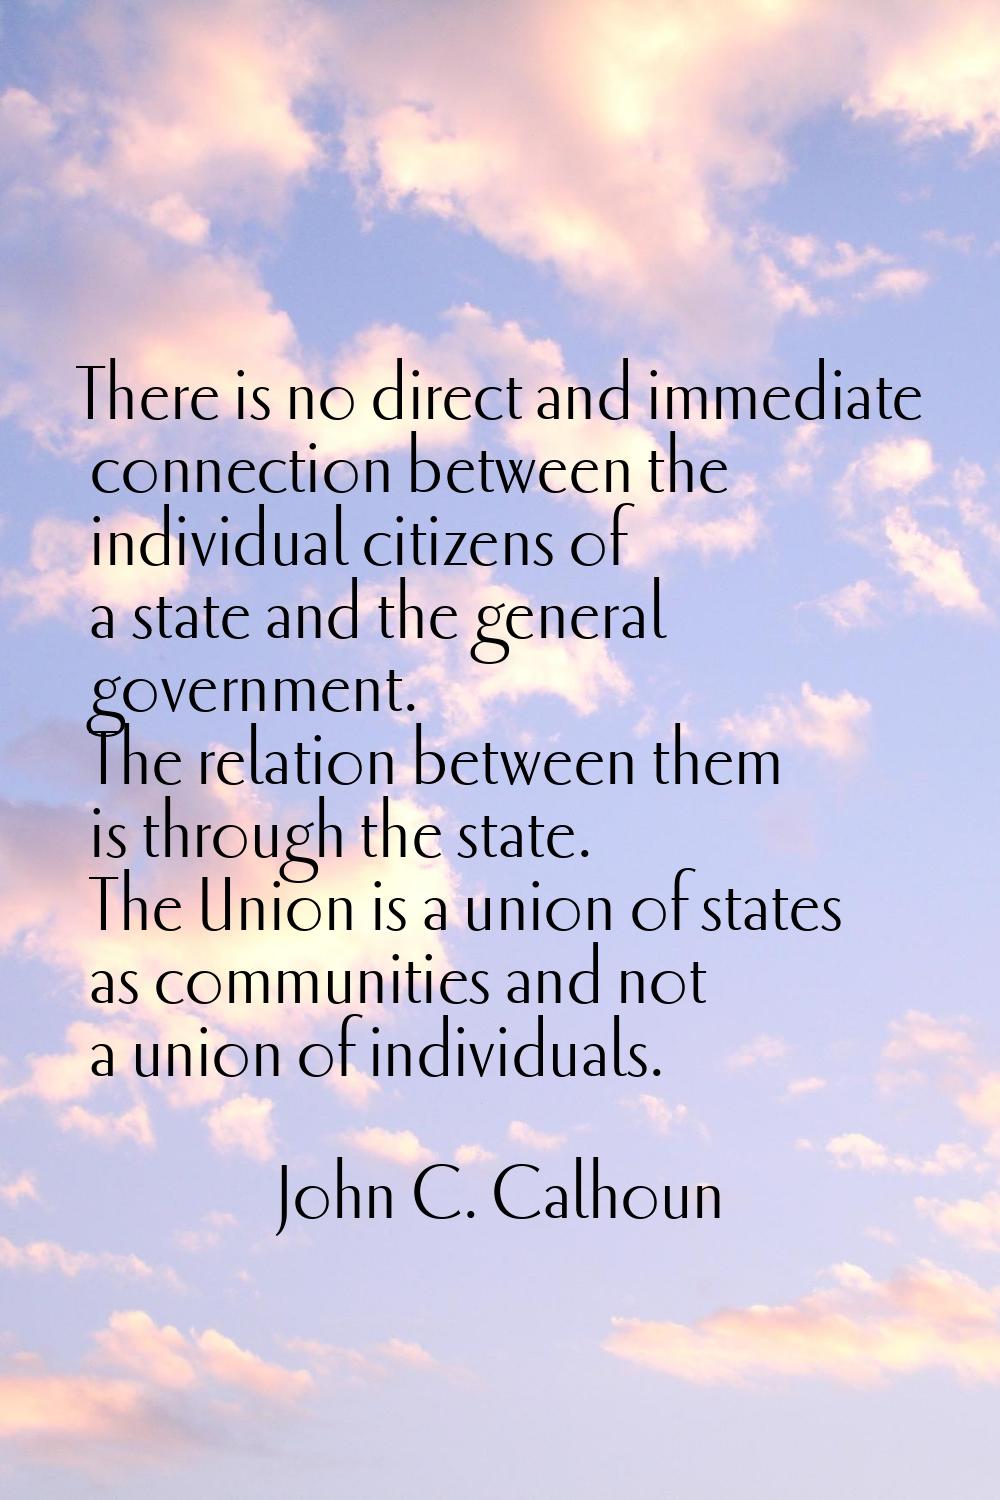 There is no direct and immediate connection between the individual citizens of a state and the gene